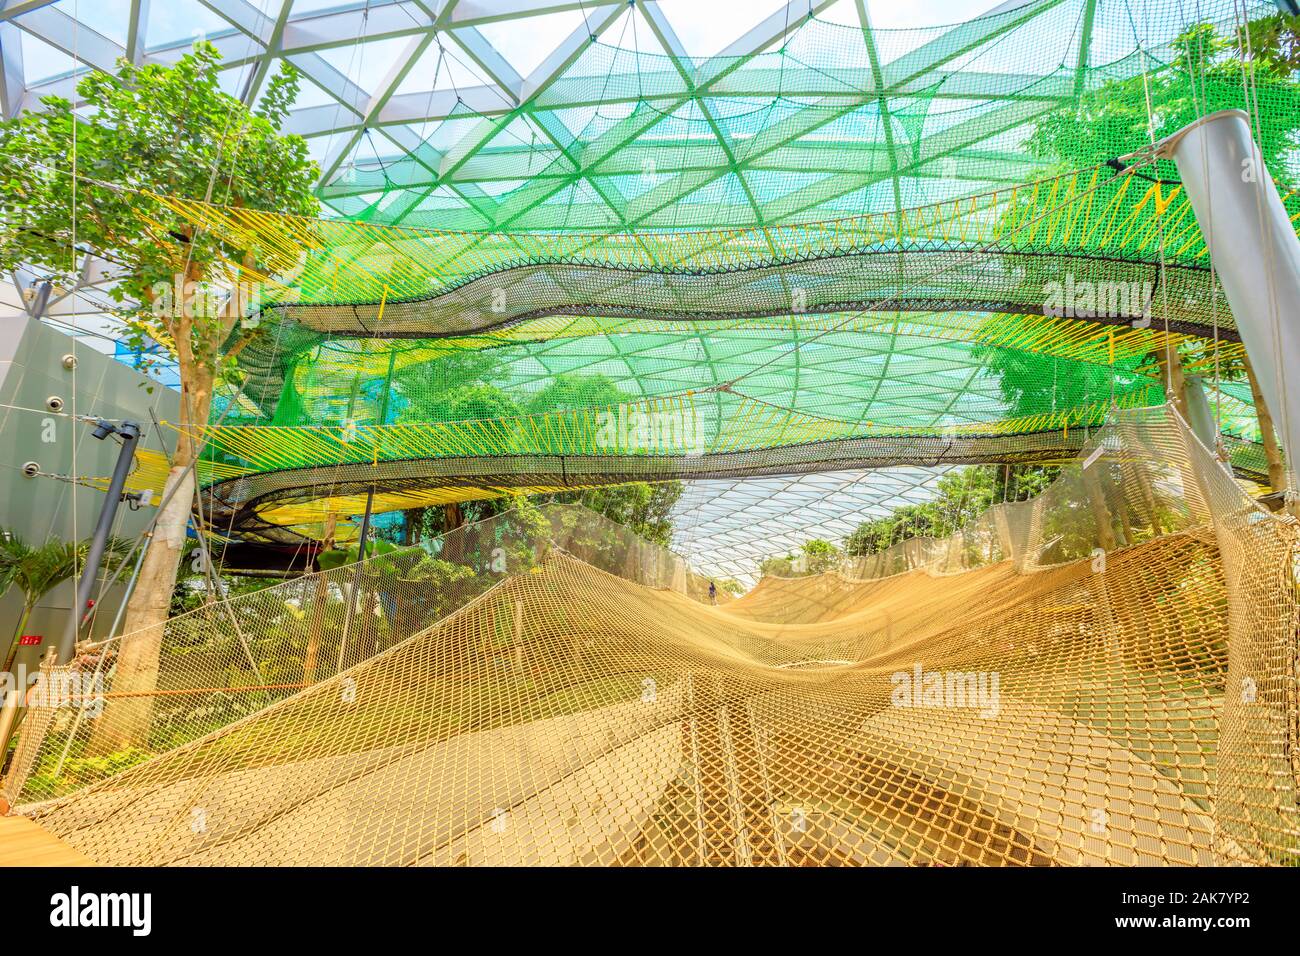 Singapore - Aug 8, 2019: Manulife Sky Nets Bouncing the most fun attraction in Canopy Park in Jewel Changi Airport, a nature-themed with gardens Stock Photo